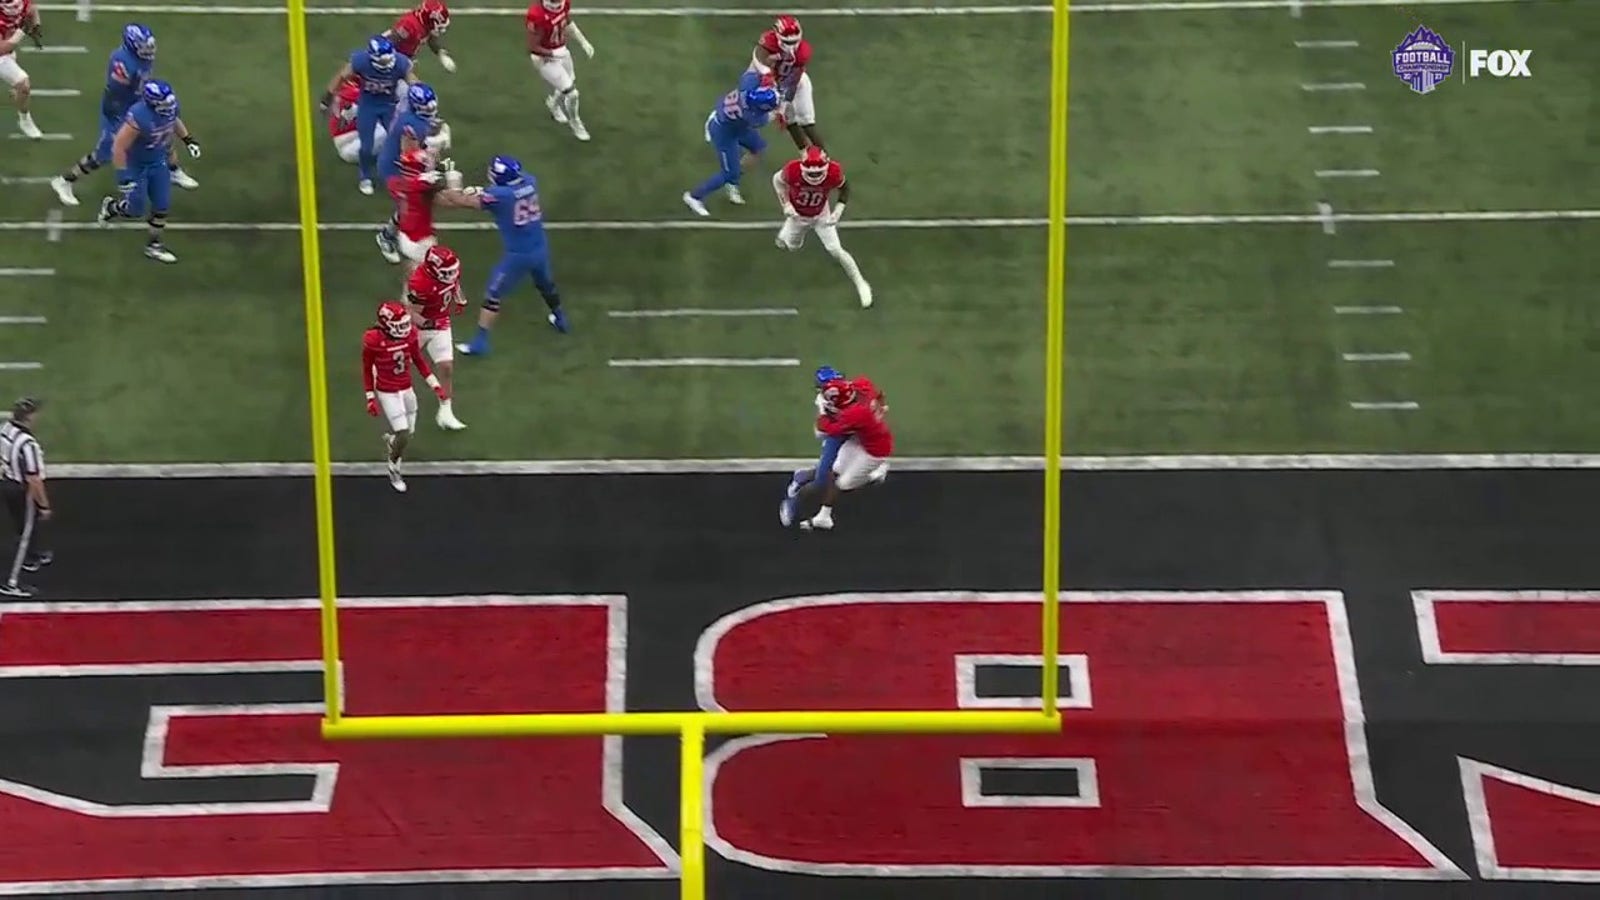 Ashton Jeanty scores on a 5-yard rushing TD, giving Boise State the lead vs. UNLV